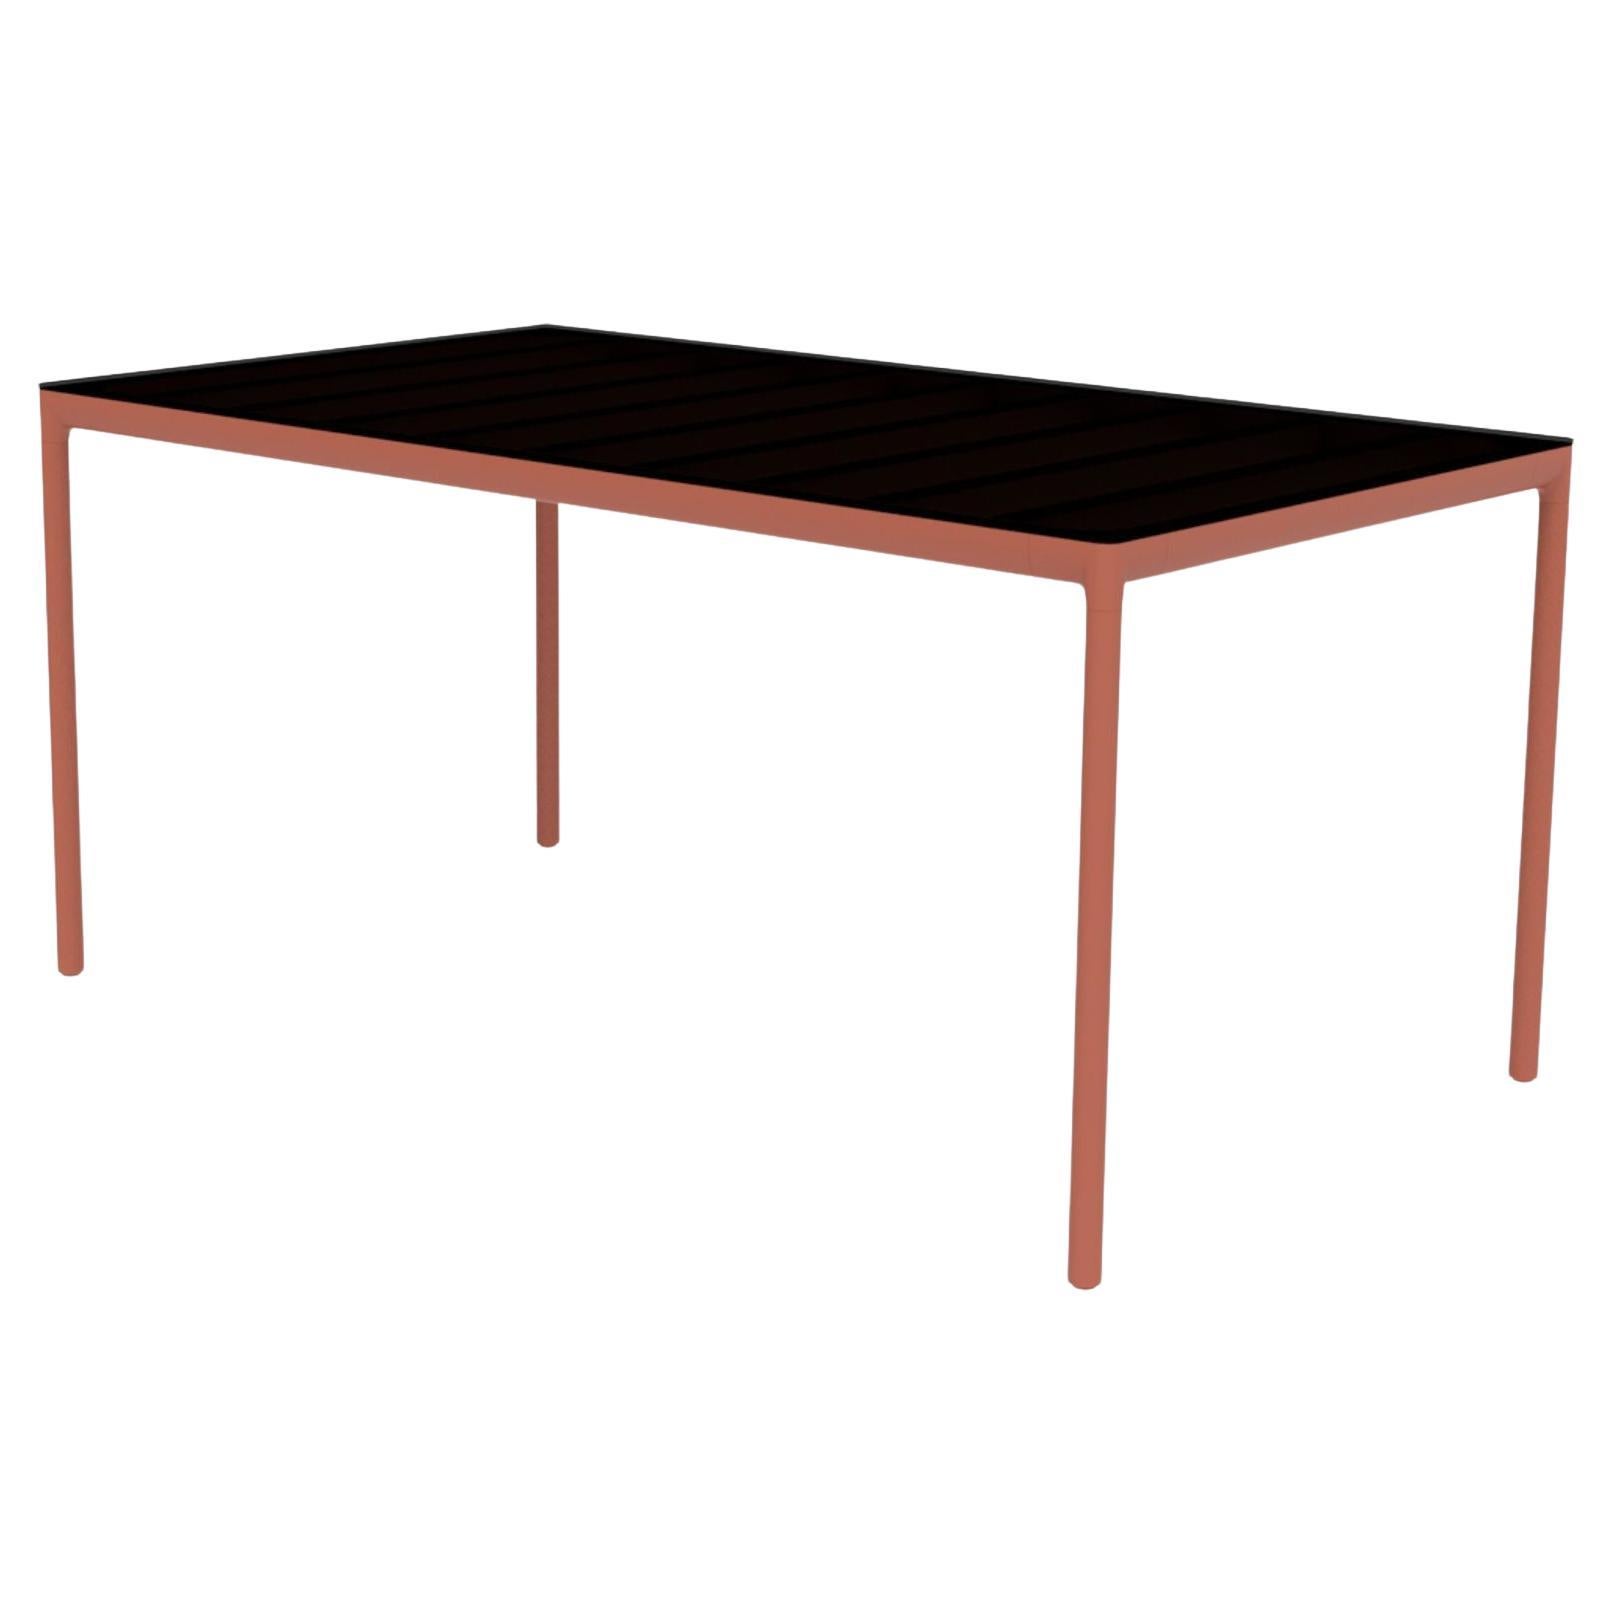 Ribbons Salmon 160 Coffee Table by Mowee For Sale